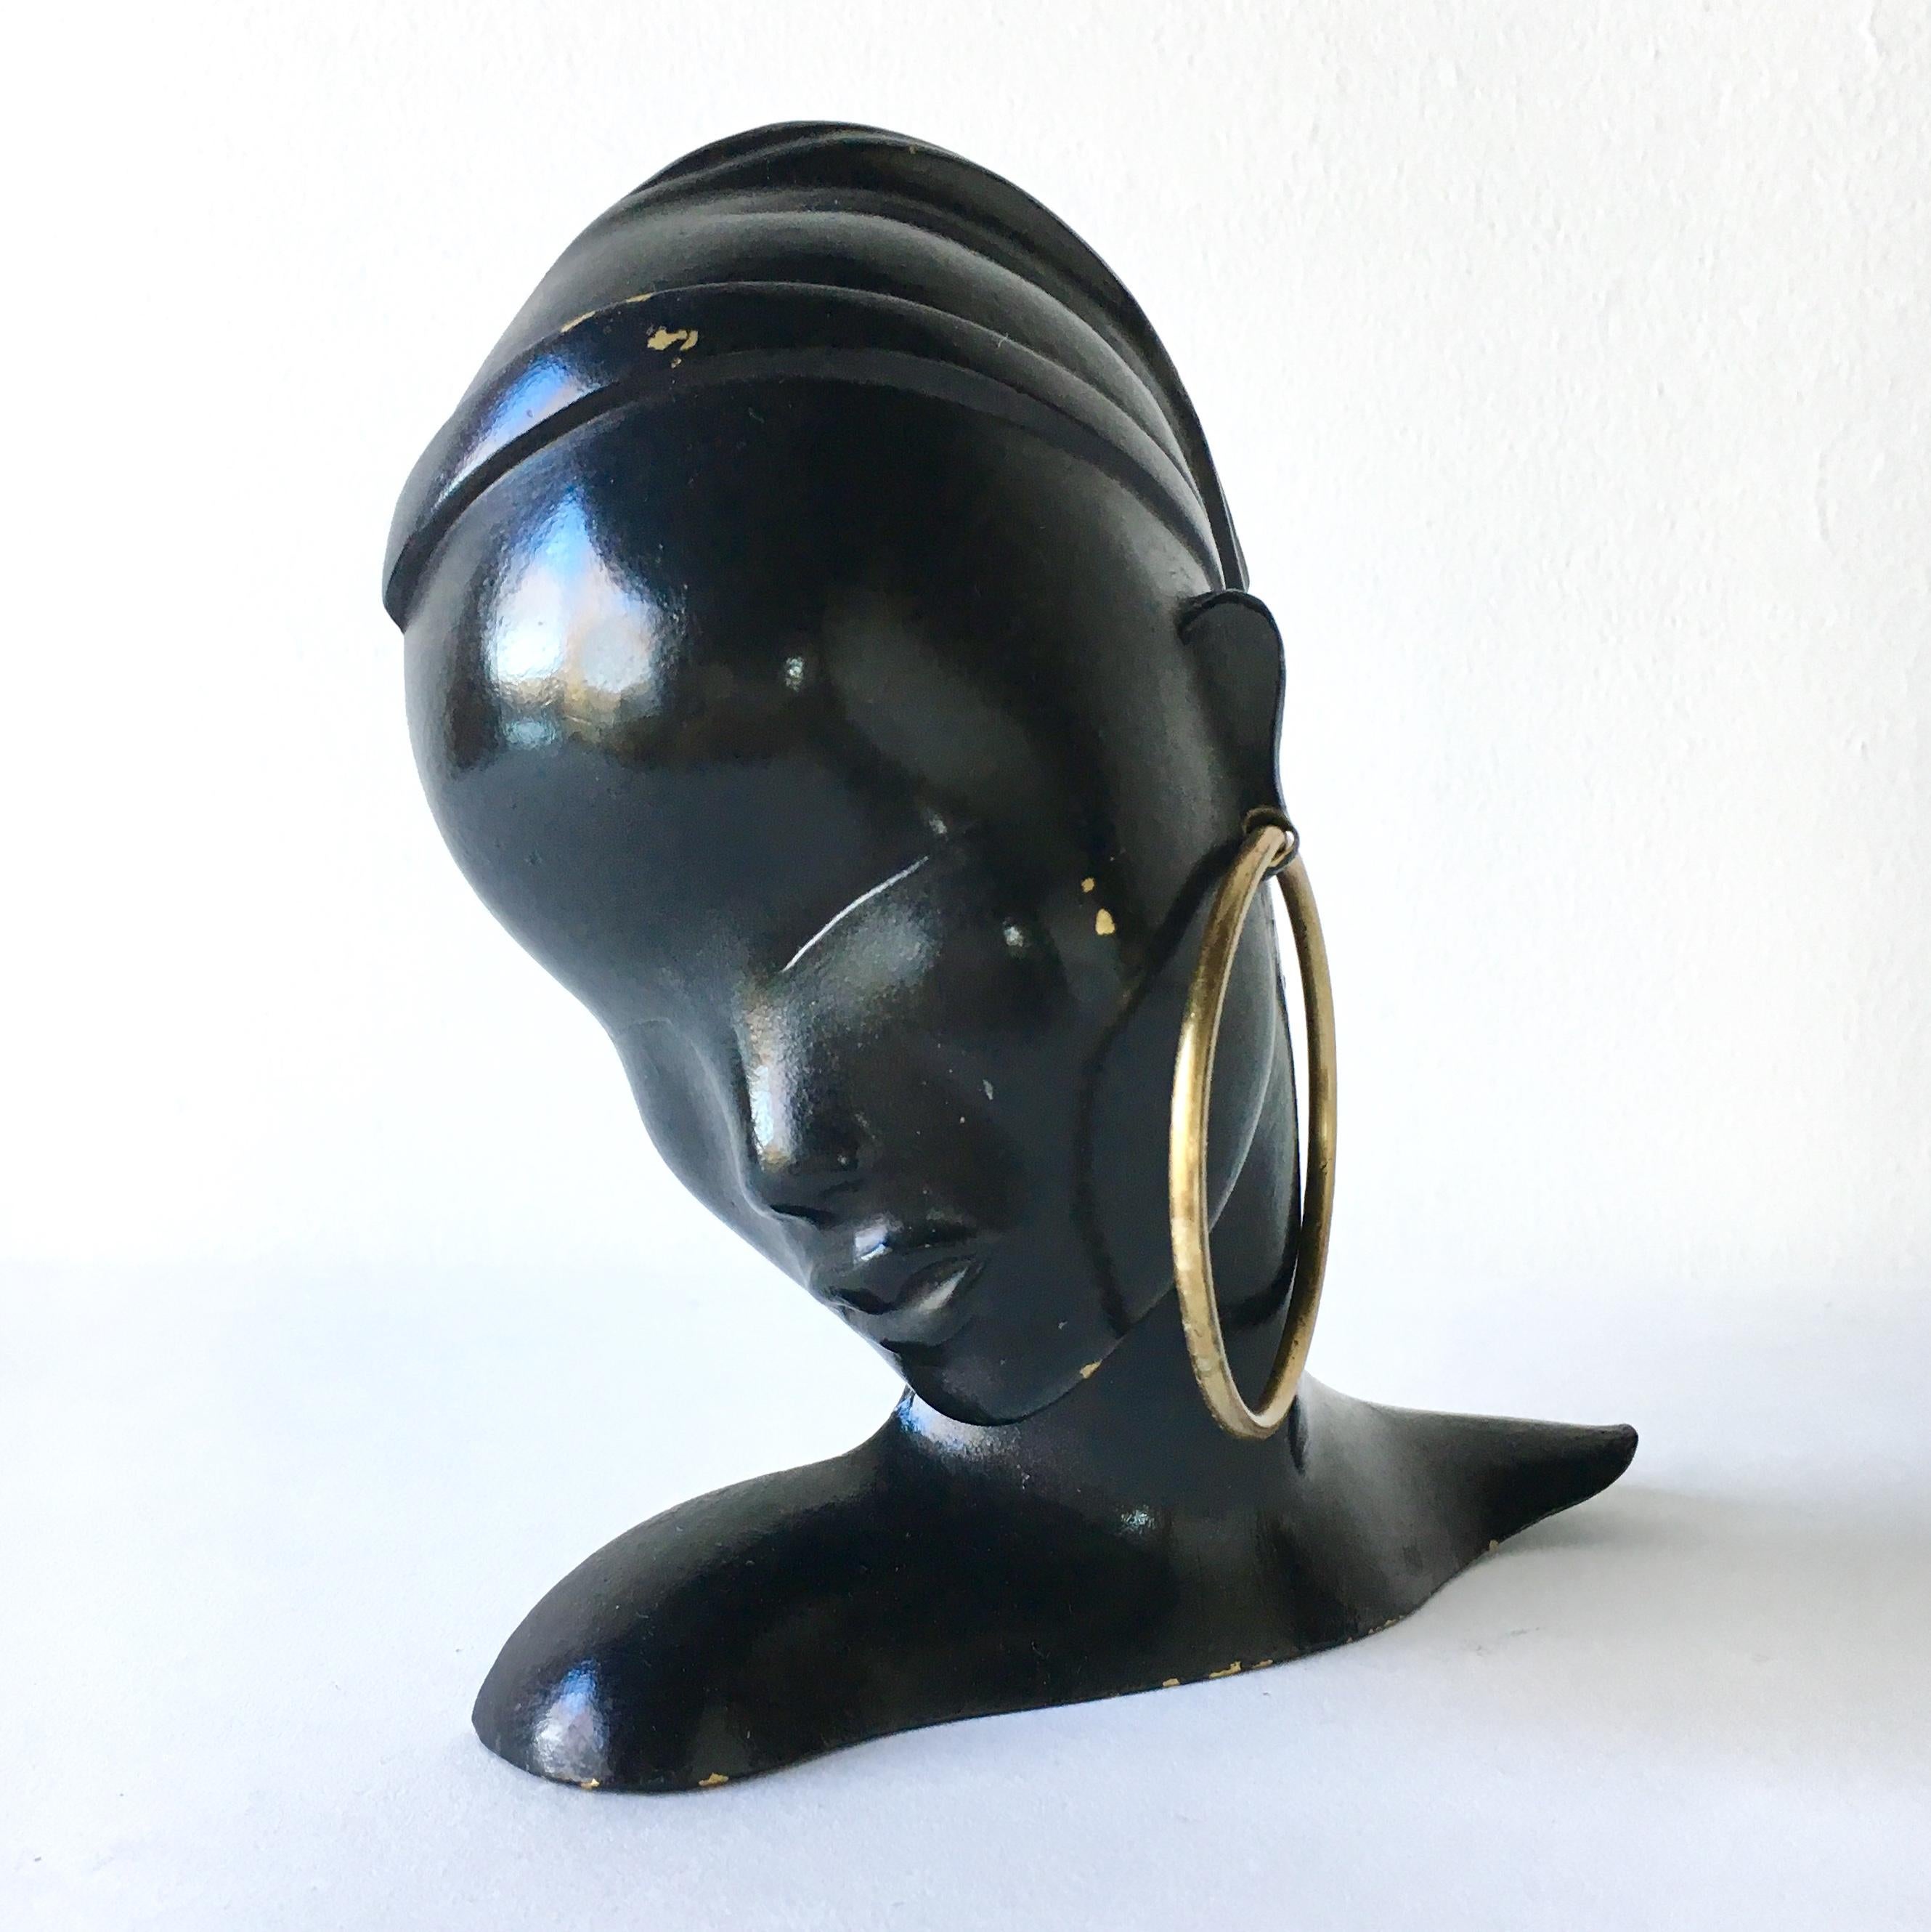 An Art Deco ebonised bronze mask of female form by Hagenauer, stamped Austria

Hagenauer Werkstatten was founded by Carl Hagenauer an Austrian designer in 1898 and continued by his sons Franz and Karl Hagenauer from 1928–1986. The majority of